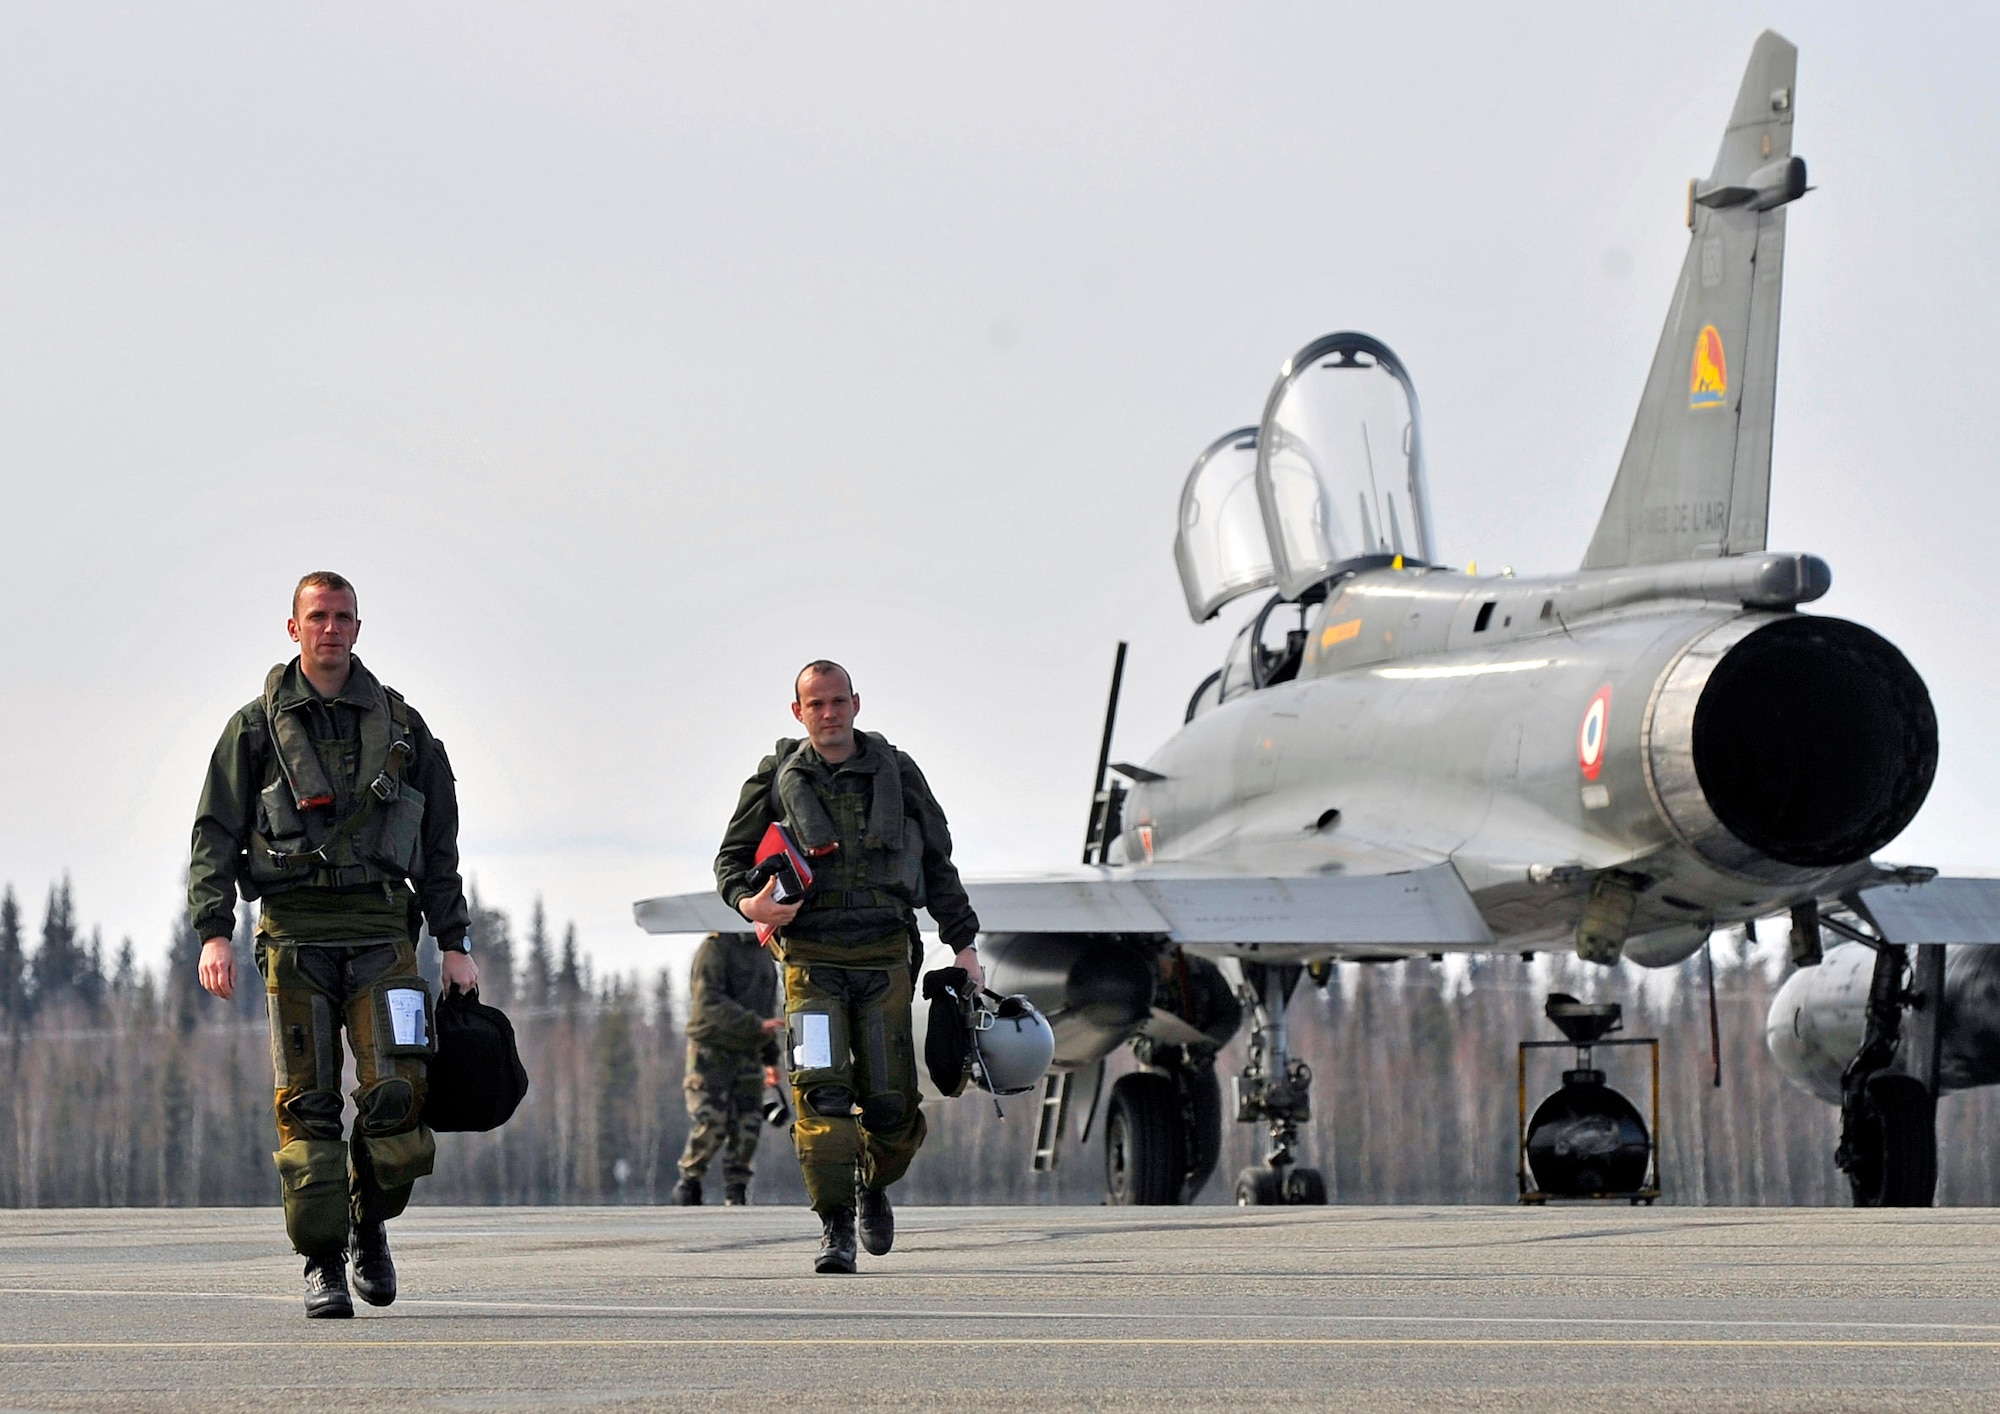 Two fighter pilots from Luxeuil Air Base, France, walk off the tarmac at Eielson Air Force Base, Alaska, April 14.  French air force members arrived at Eielson AFB to participate in Red Flag-Alaska, a military exercise conducted on the Joint Pacific Alaska Range Complex enabling the military to have the largest air-ground training area in the United States. (U.S. Air Force photo/Airman 1st Class Willard E. Grande II)